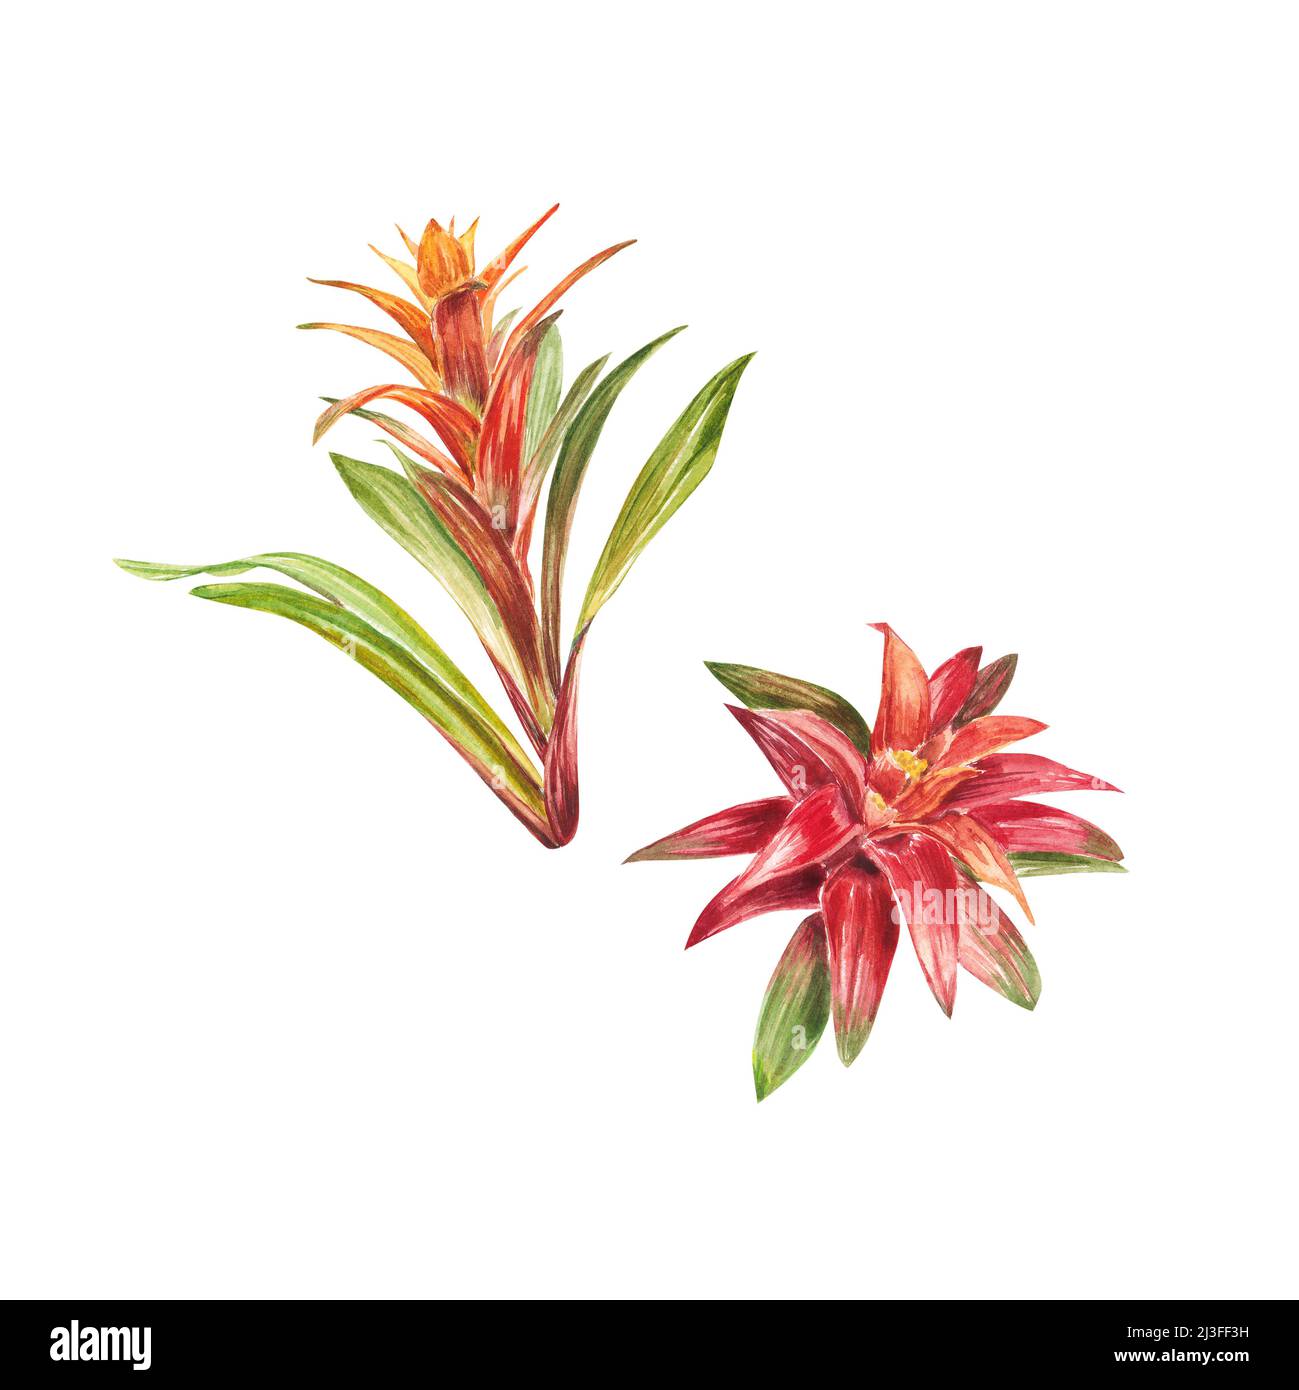 Tropical bromeliad plant with red and green leaves, hand-painted in watercolor. The illustration is highlighted on a white background. Spring or summe Stock Photo